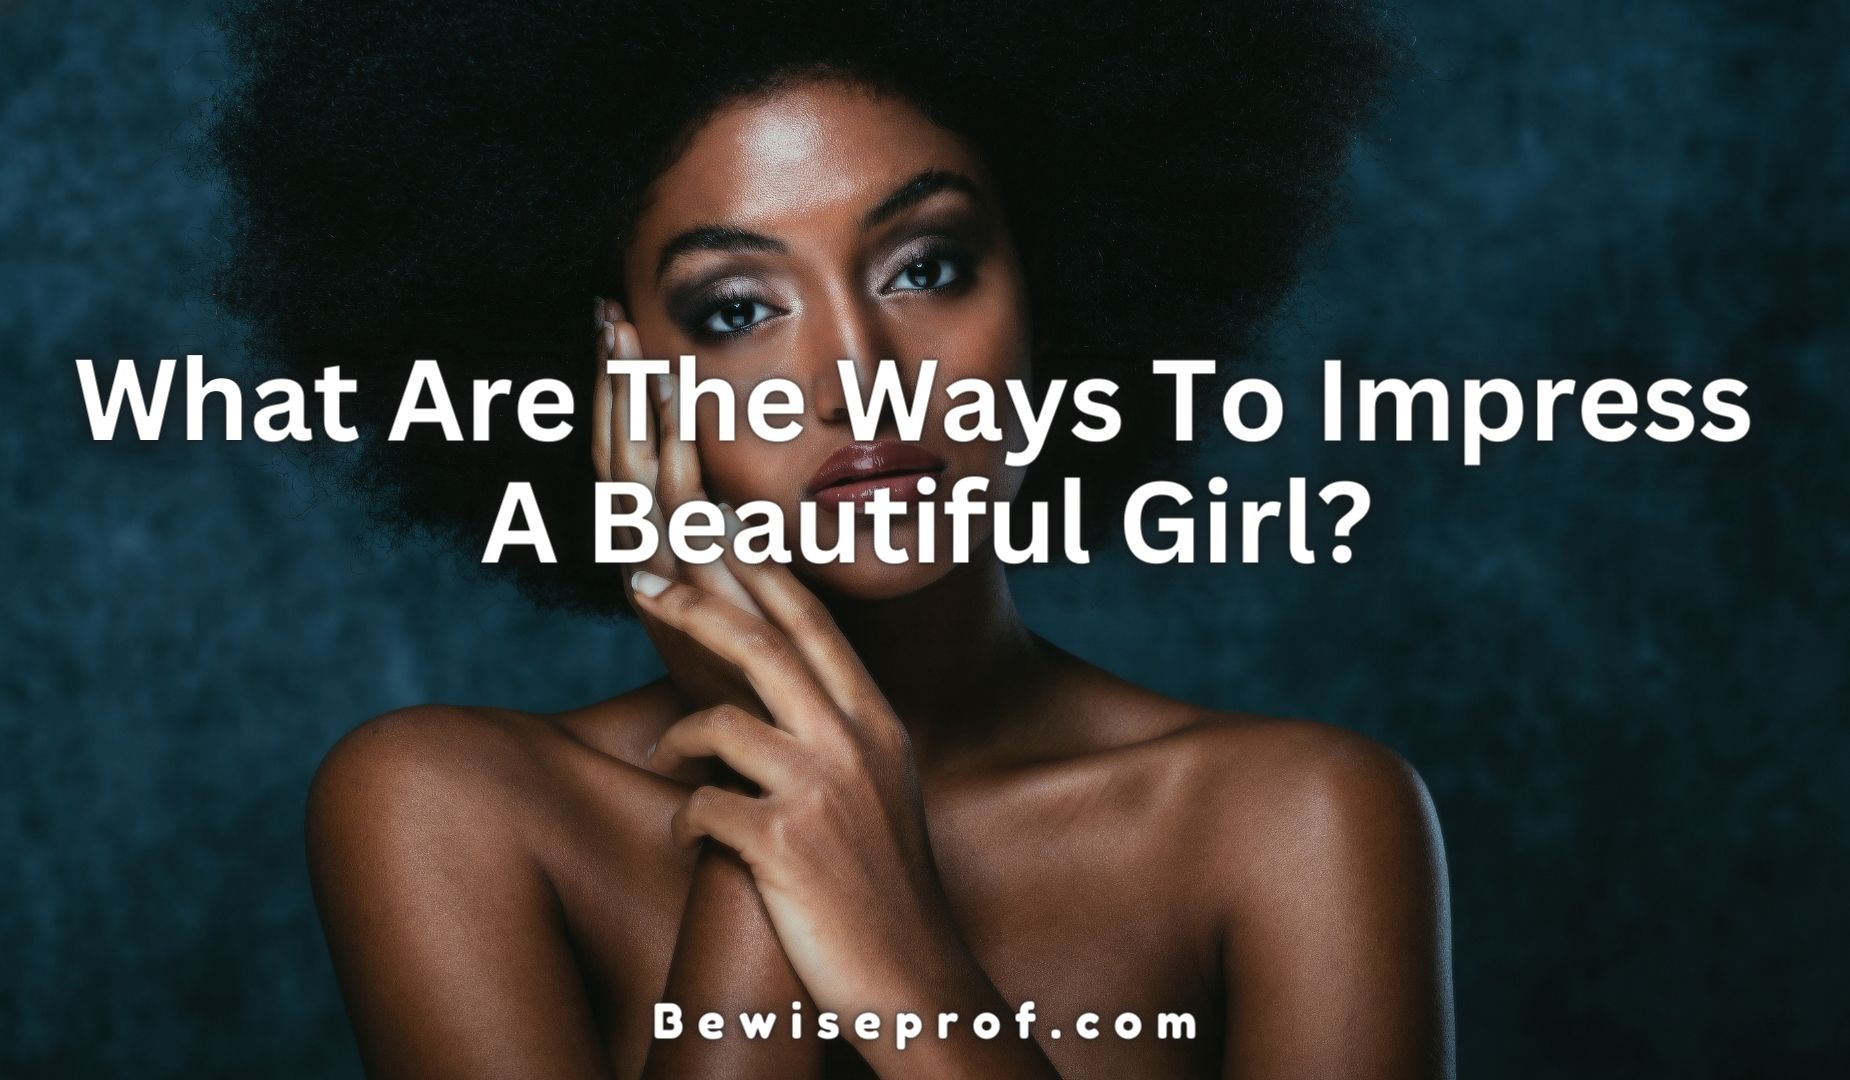 What Are The Ways To Impress A Beautiful Girl?